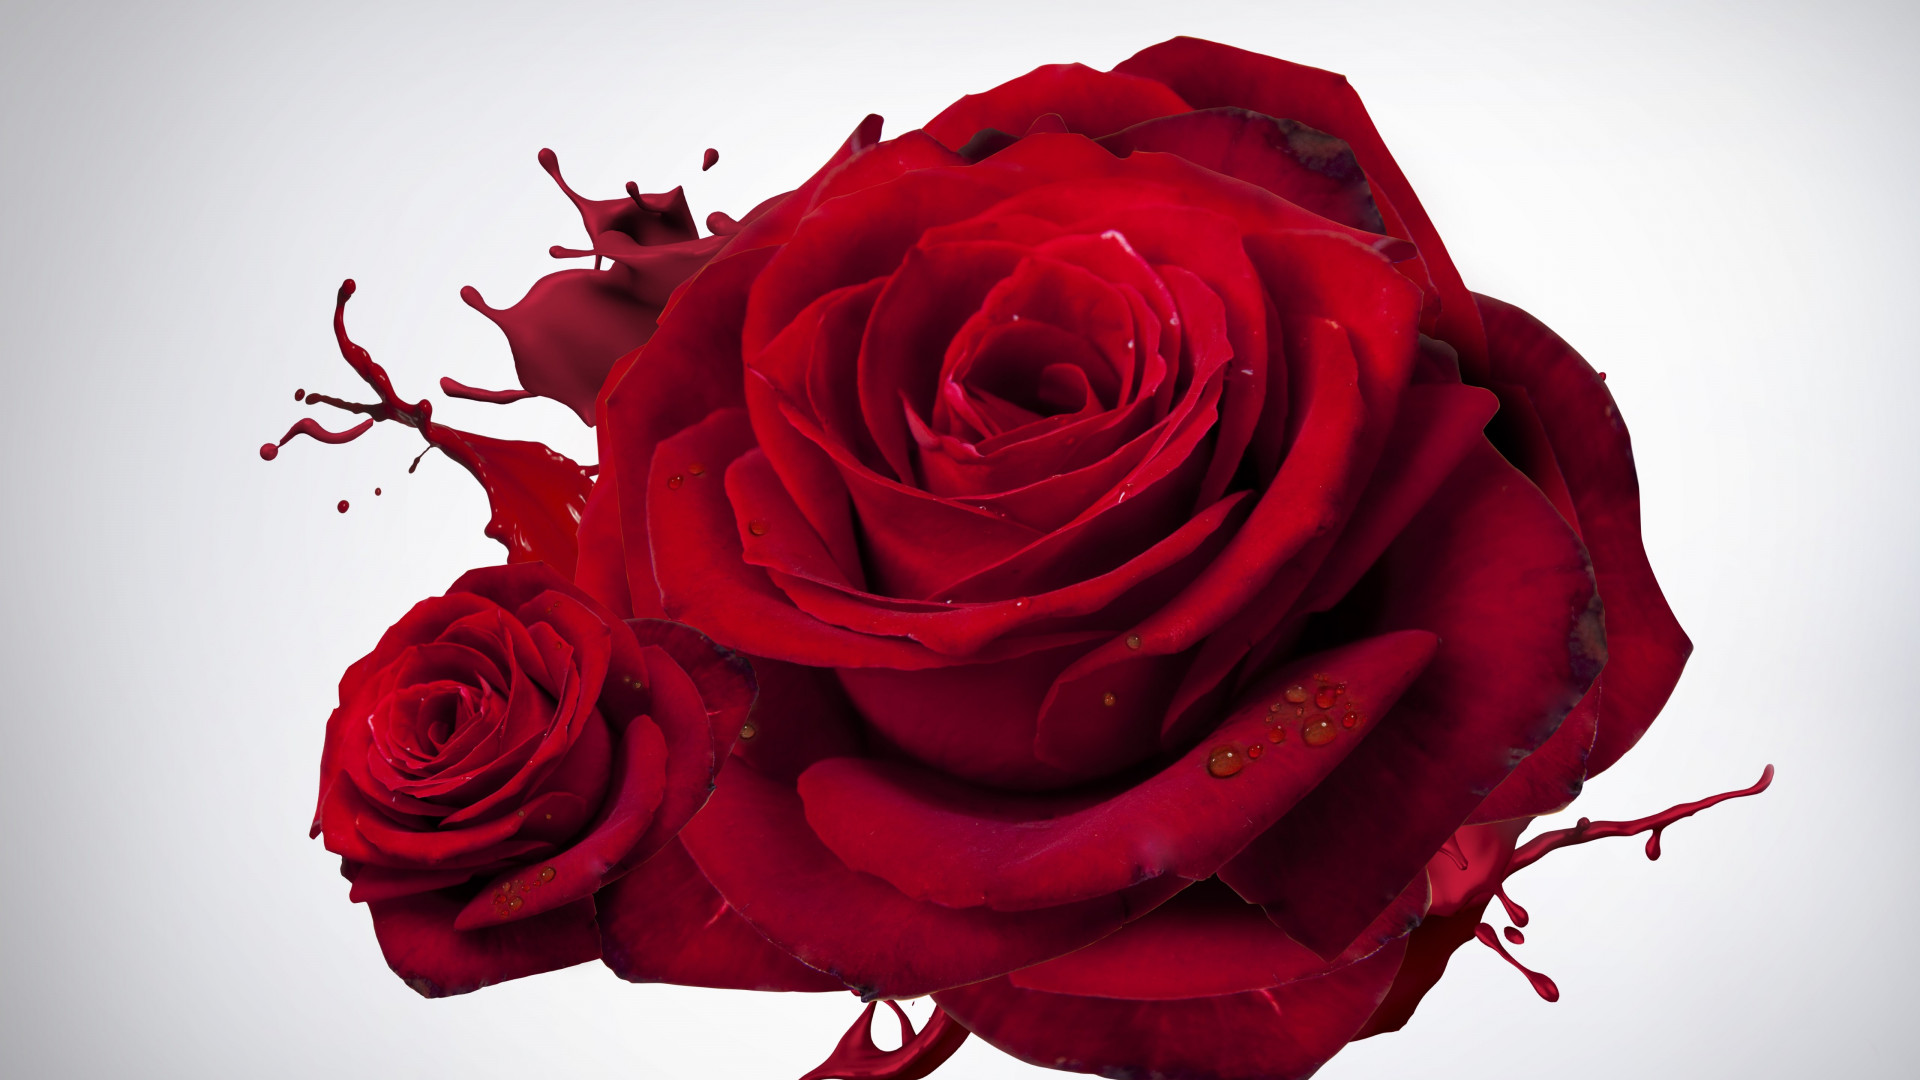 The most beautiful red roses wallpaper 1920x1080